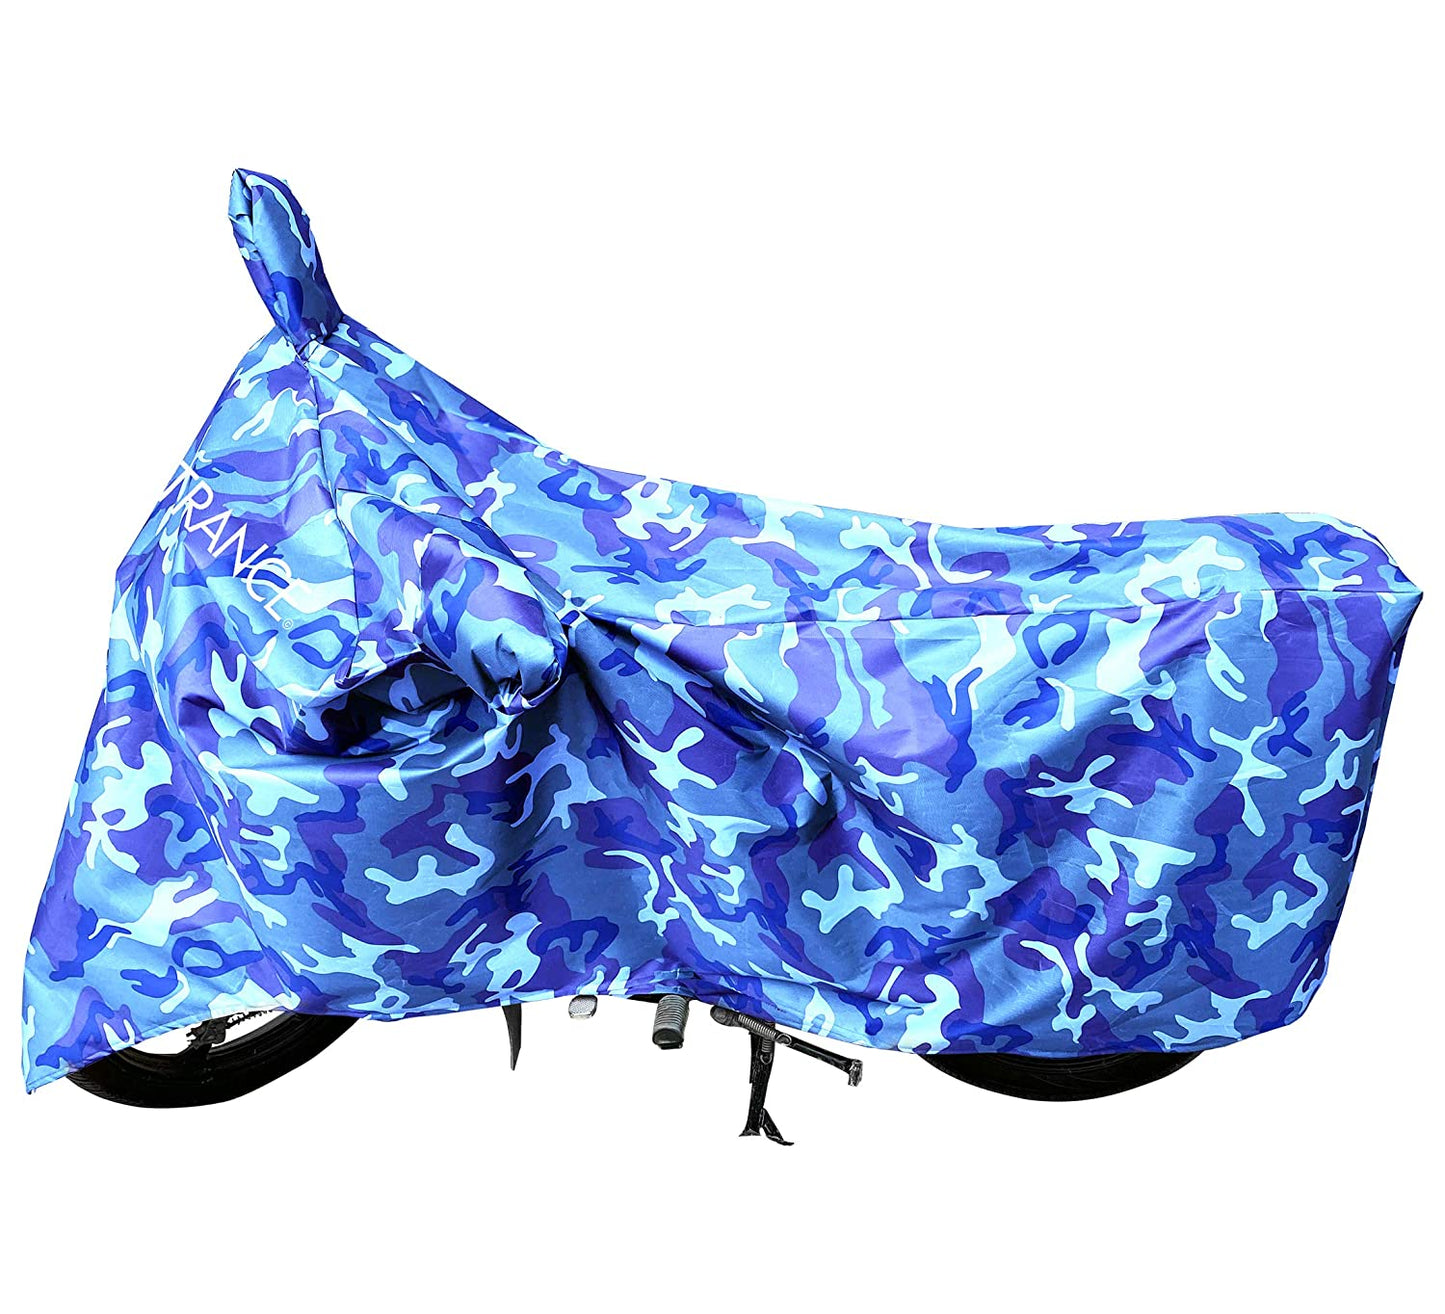 MotoTrance Jungle Bike Body Covers For Hero Pleasure - Interlock-Stitched Waterproof and Heat Resistant with Mirror Pockets